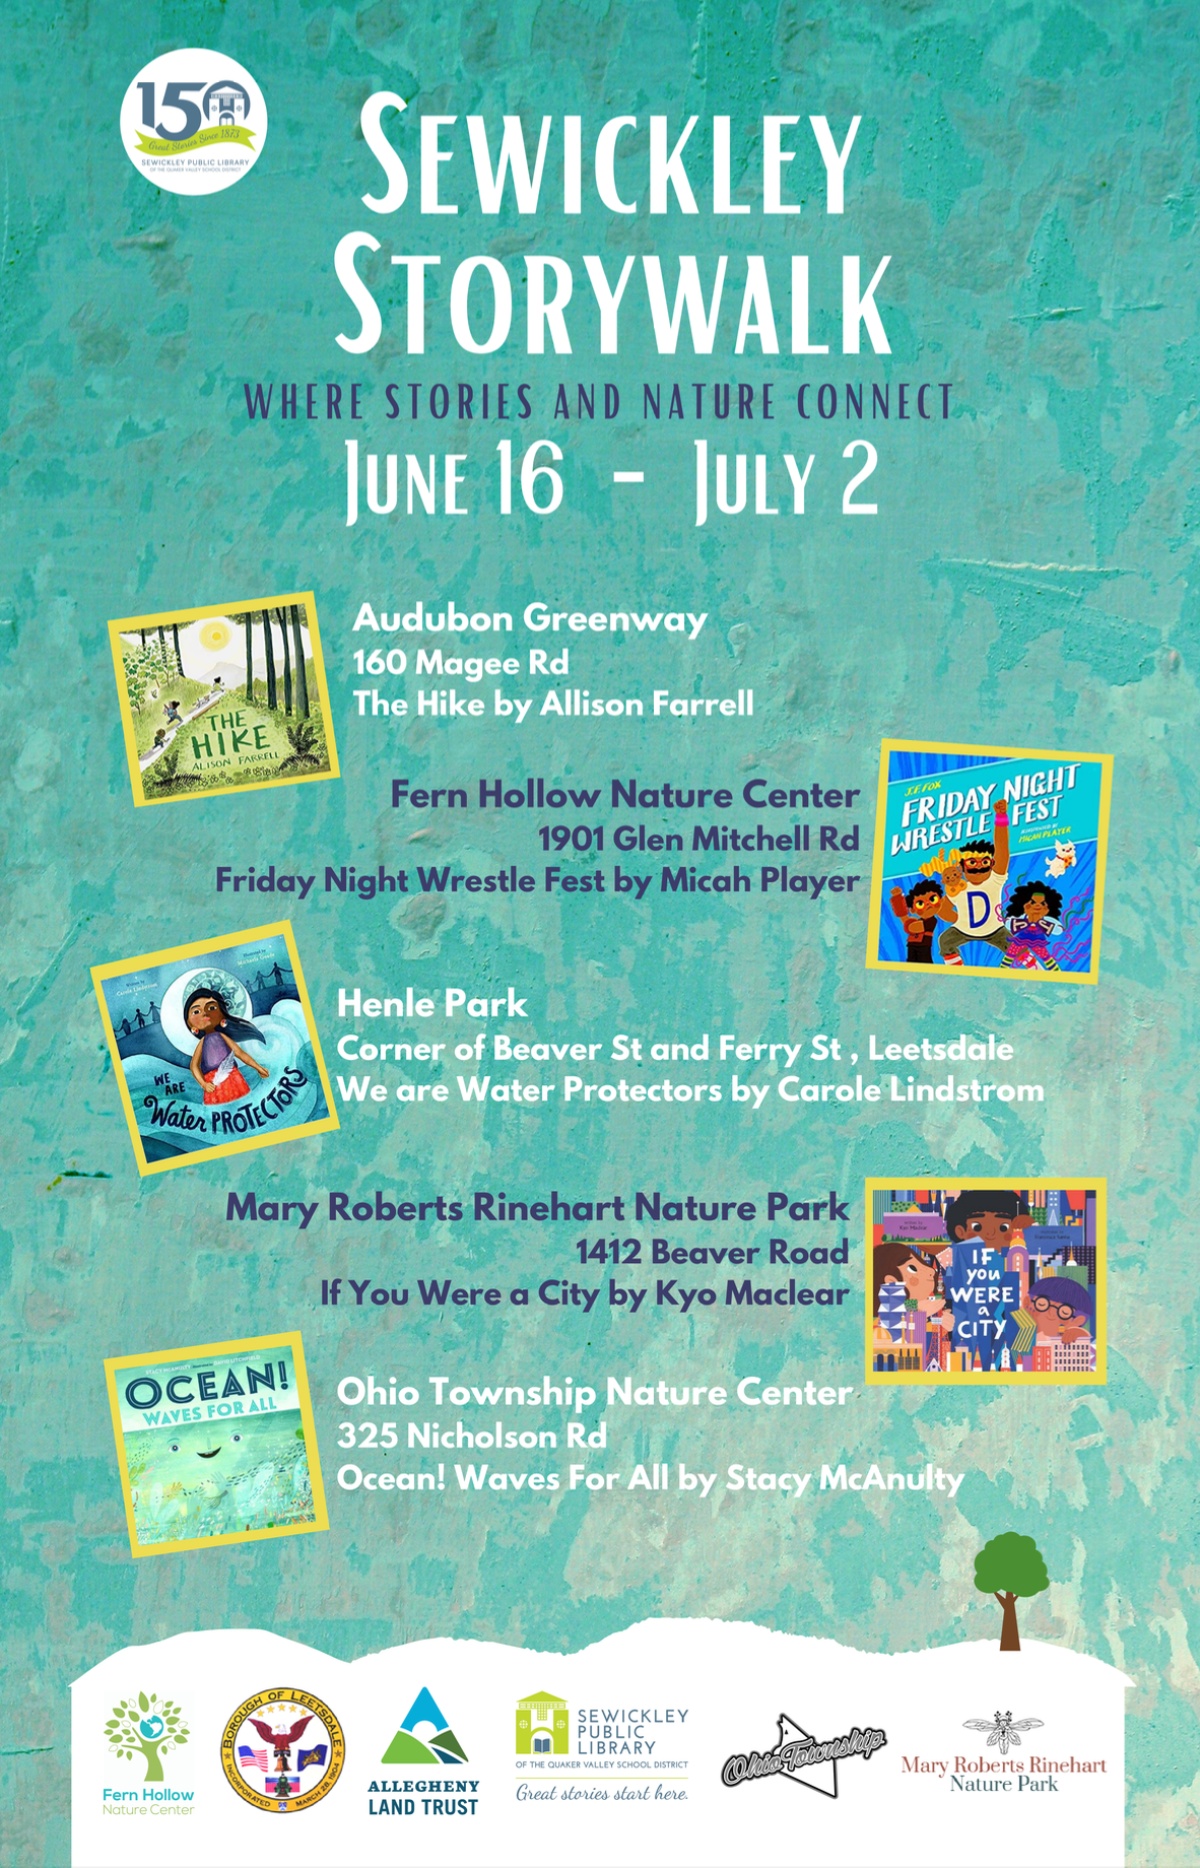 Sewickley Library Storywalk Flyer June 16th to July 2nd